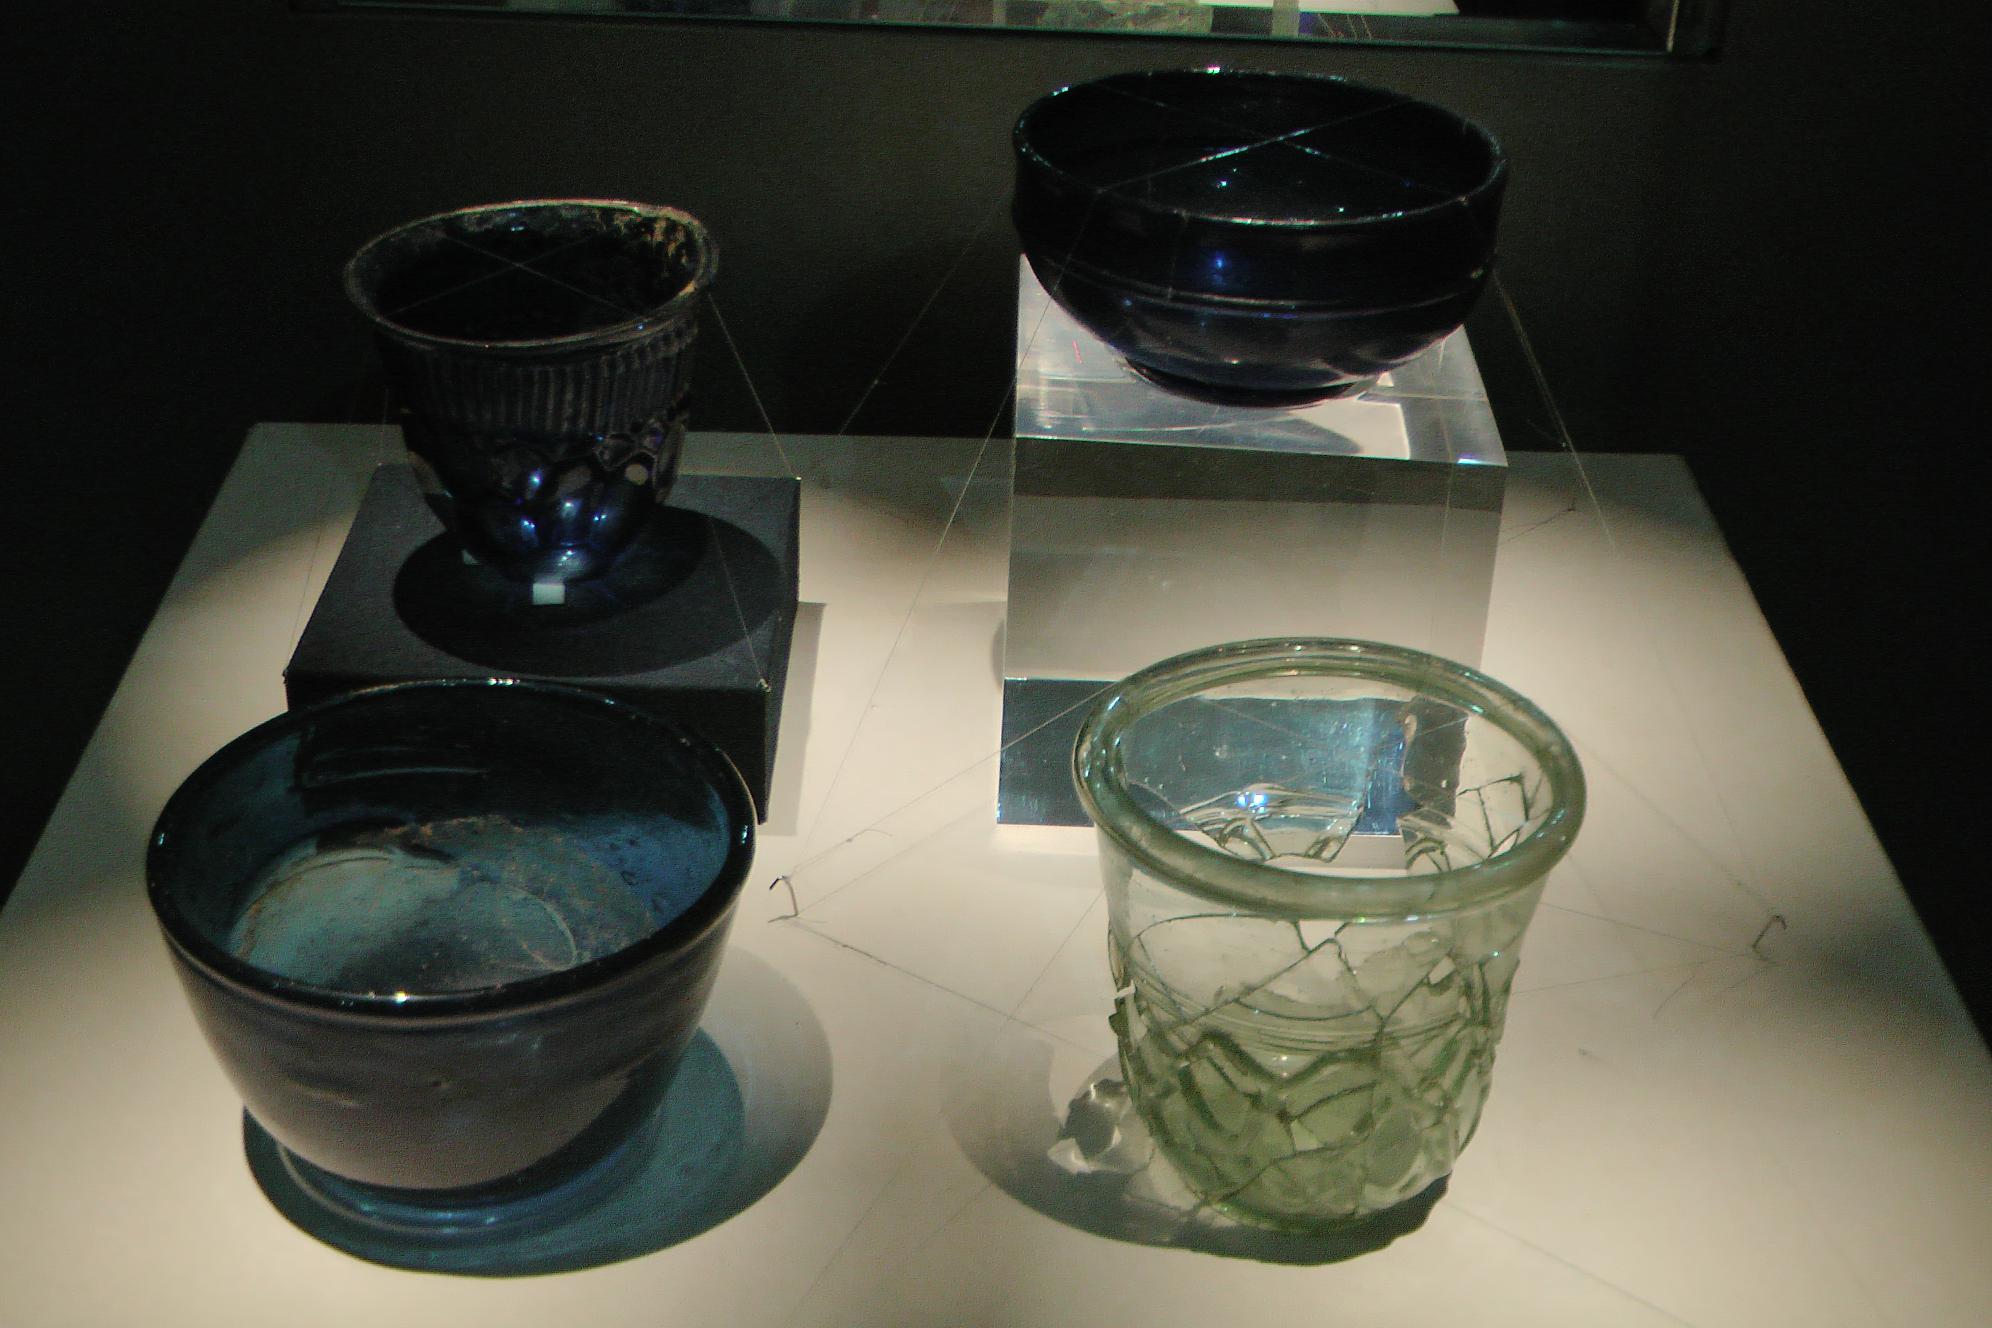 excavation finds at the national museum